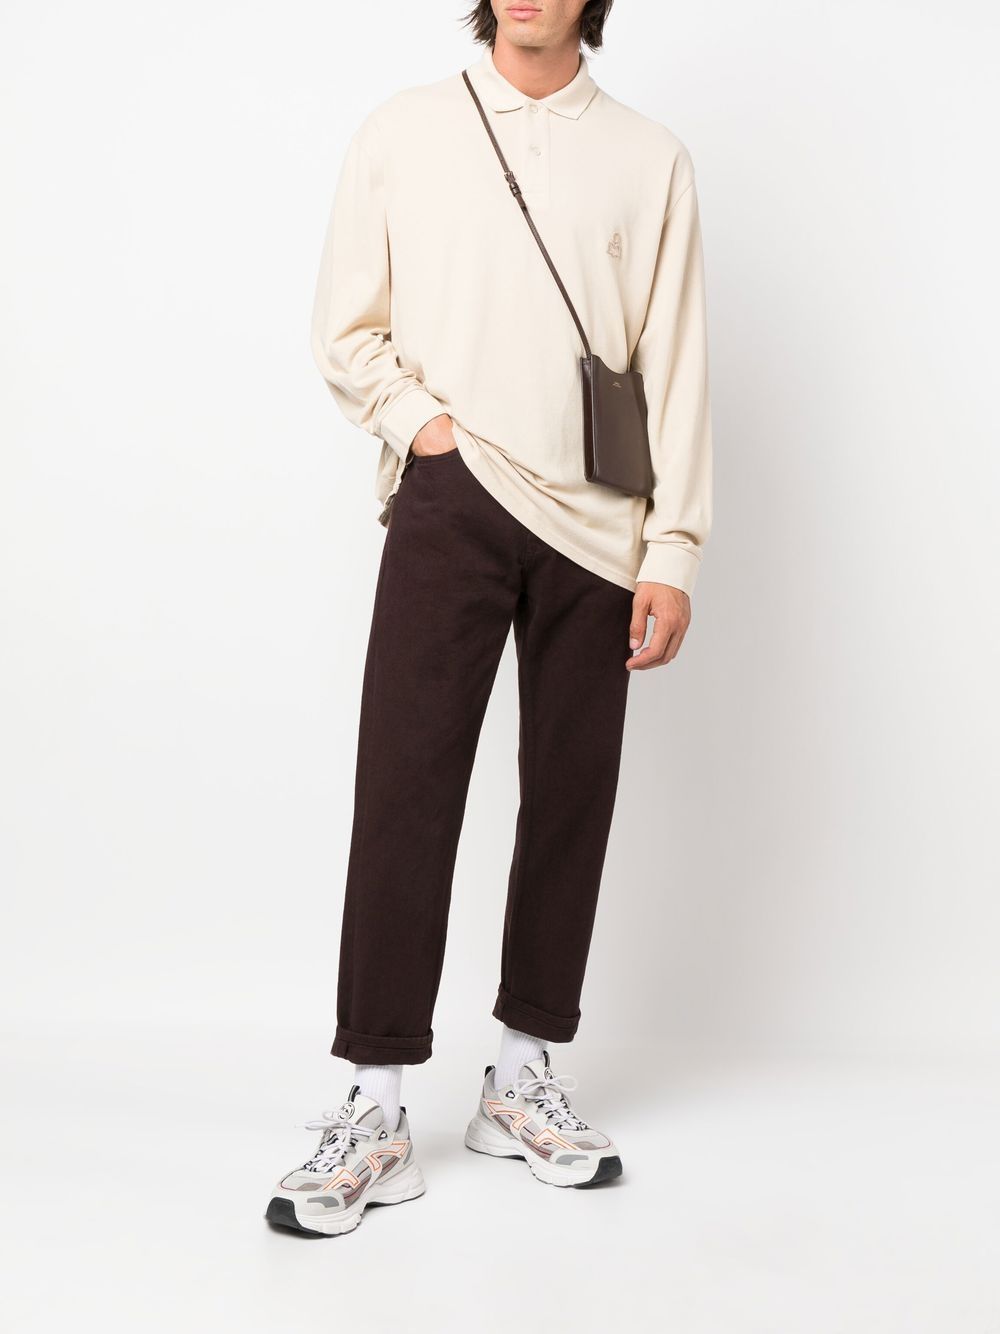 beige embroidered long-sleeve polo shirt